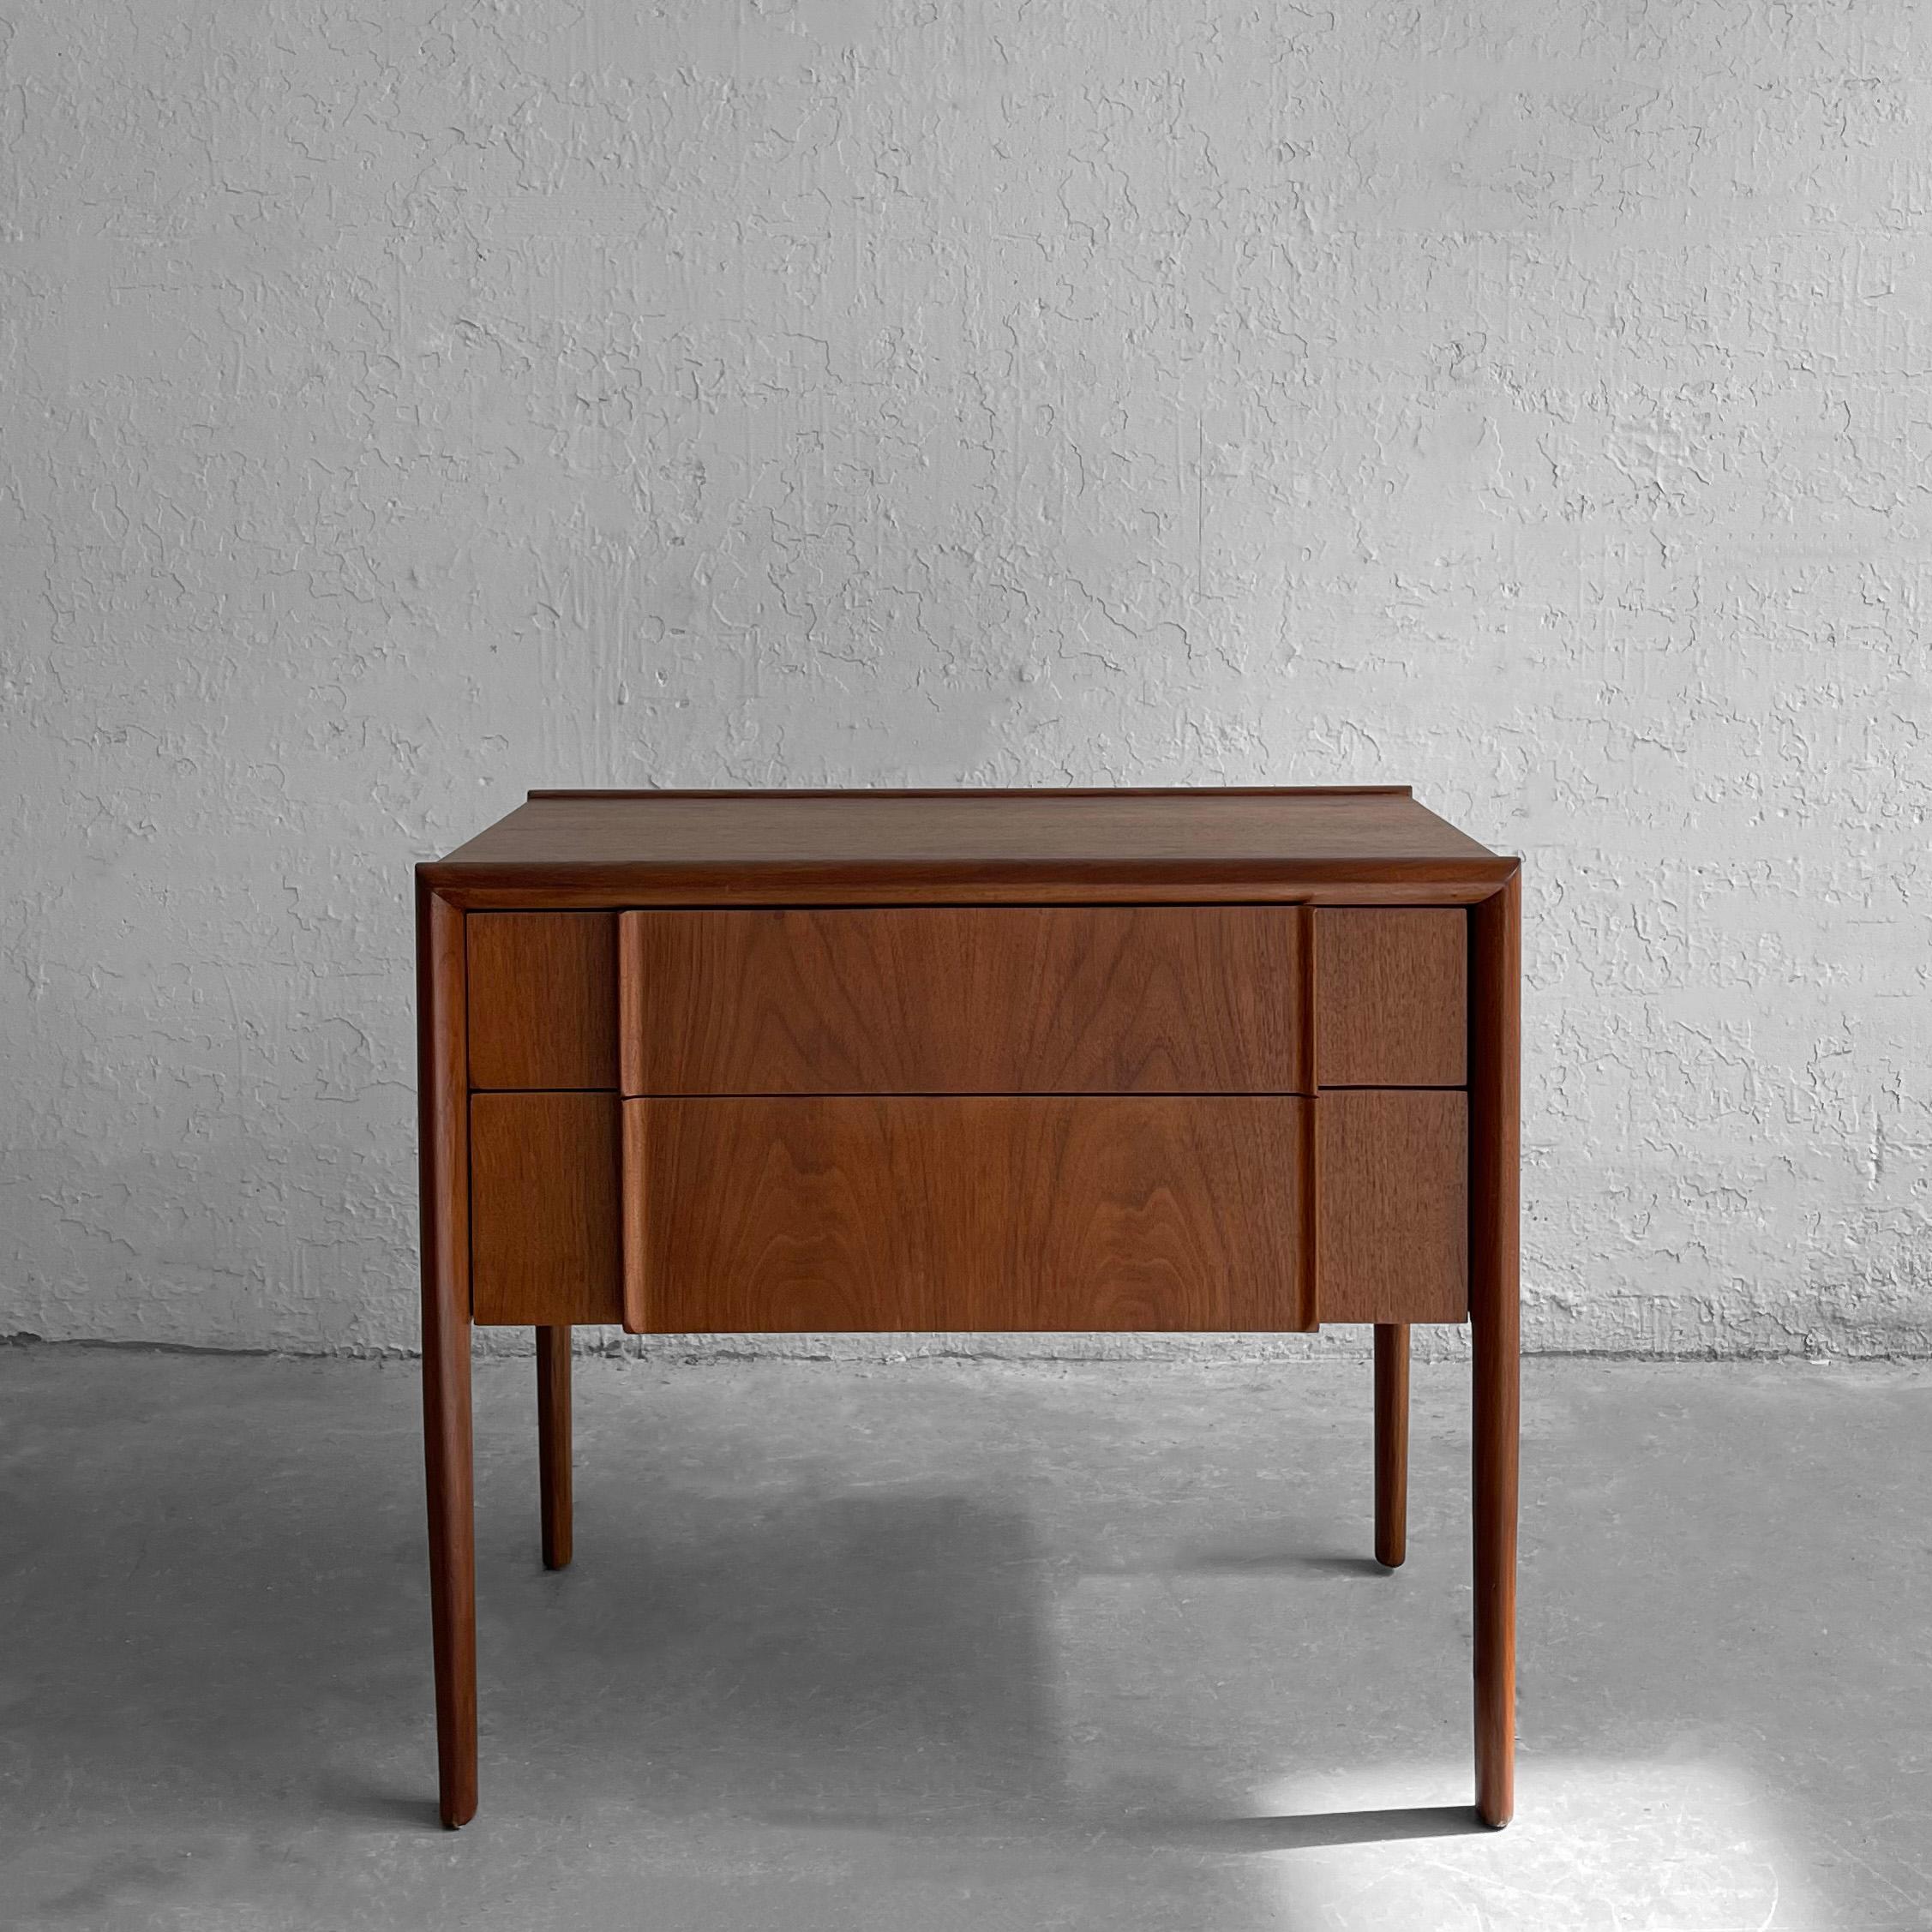 Sleek, minimal, Mid-Century Modern, walnut nightstand by Barney Flagg for Drexel Furniture from the 